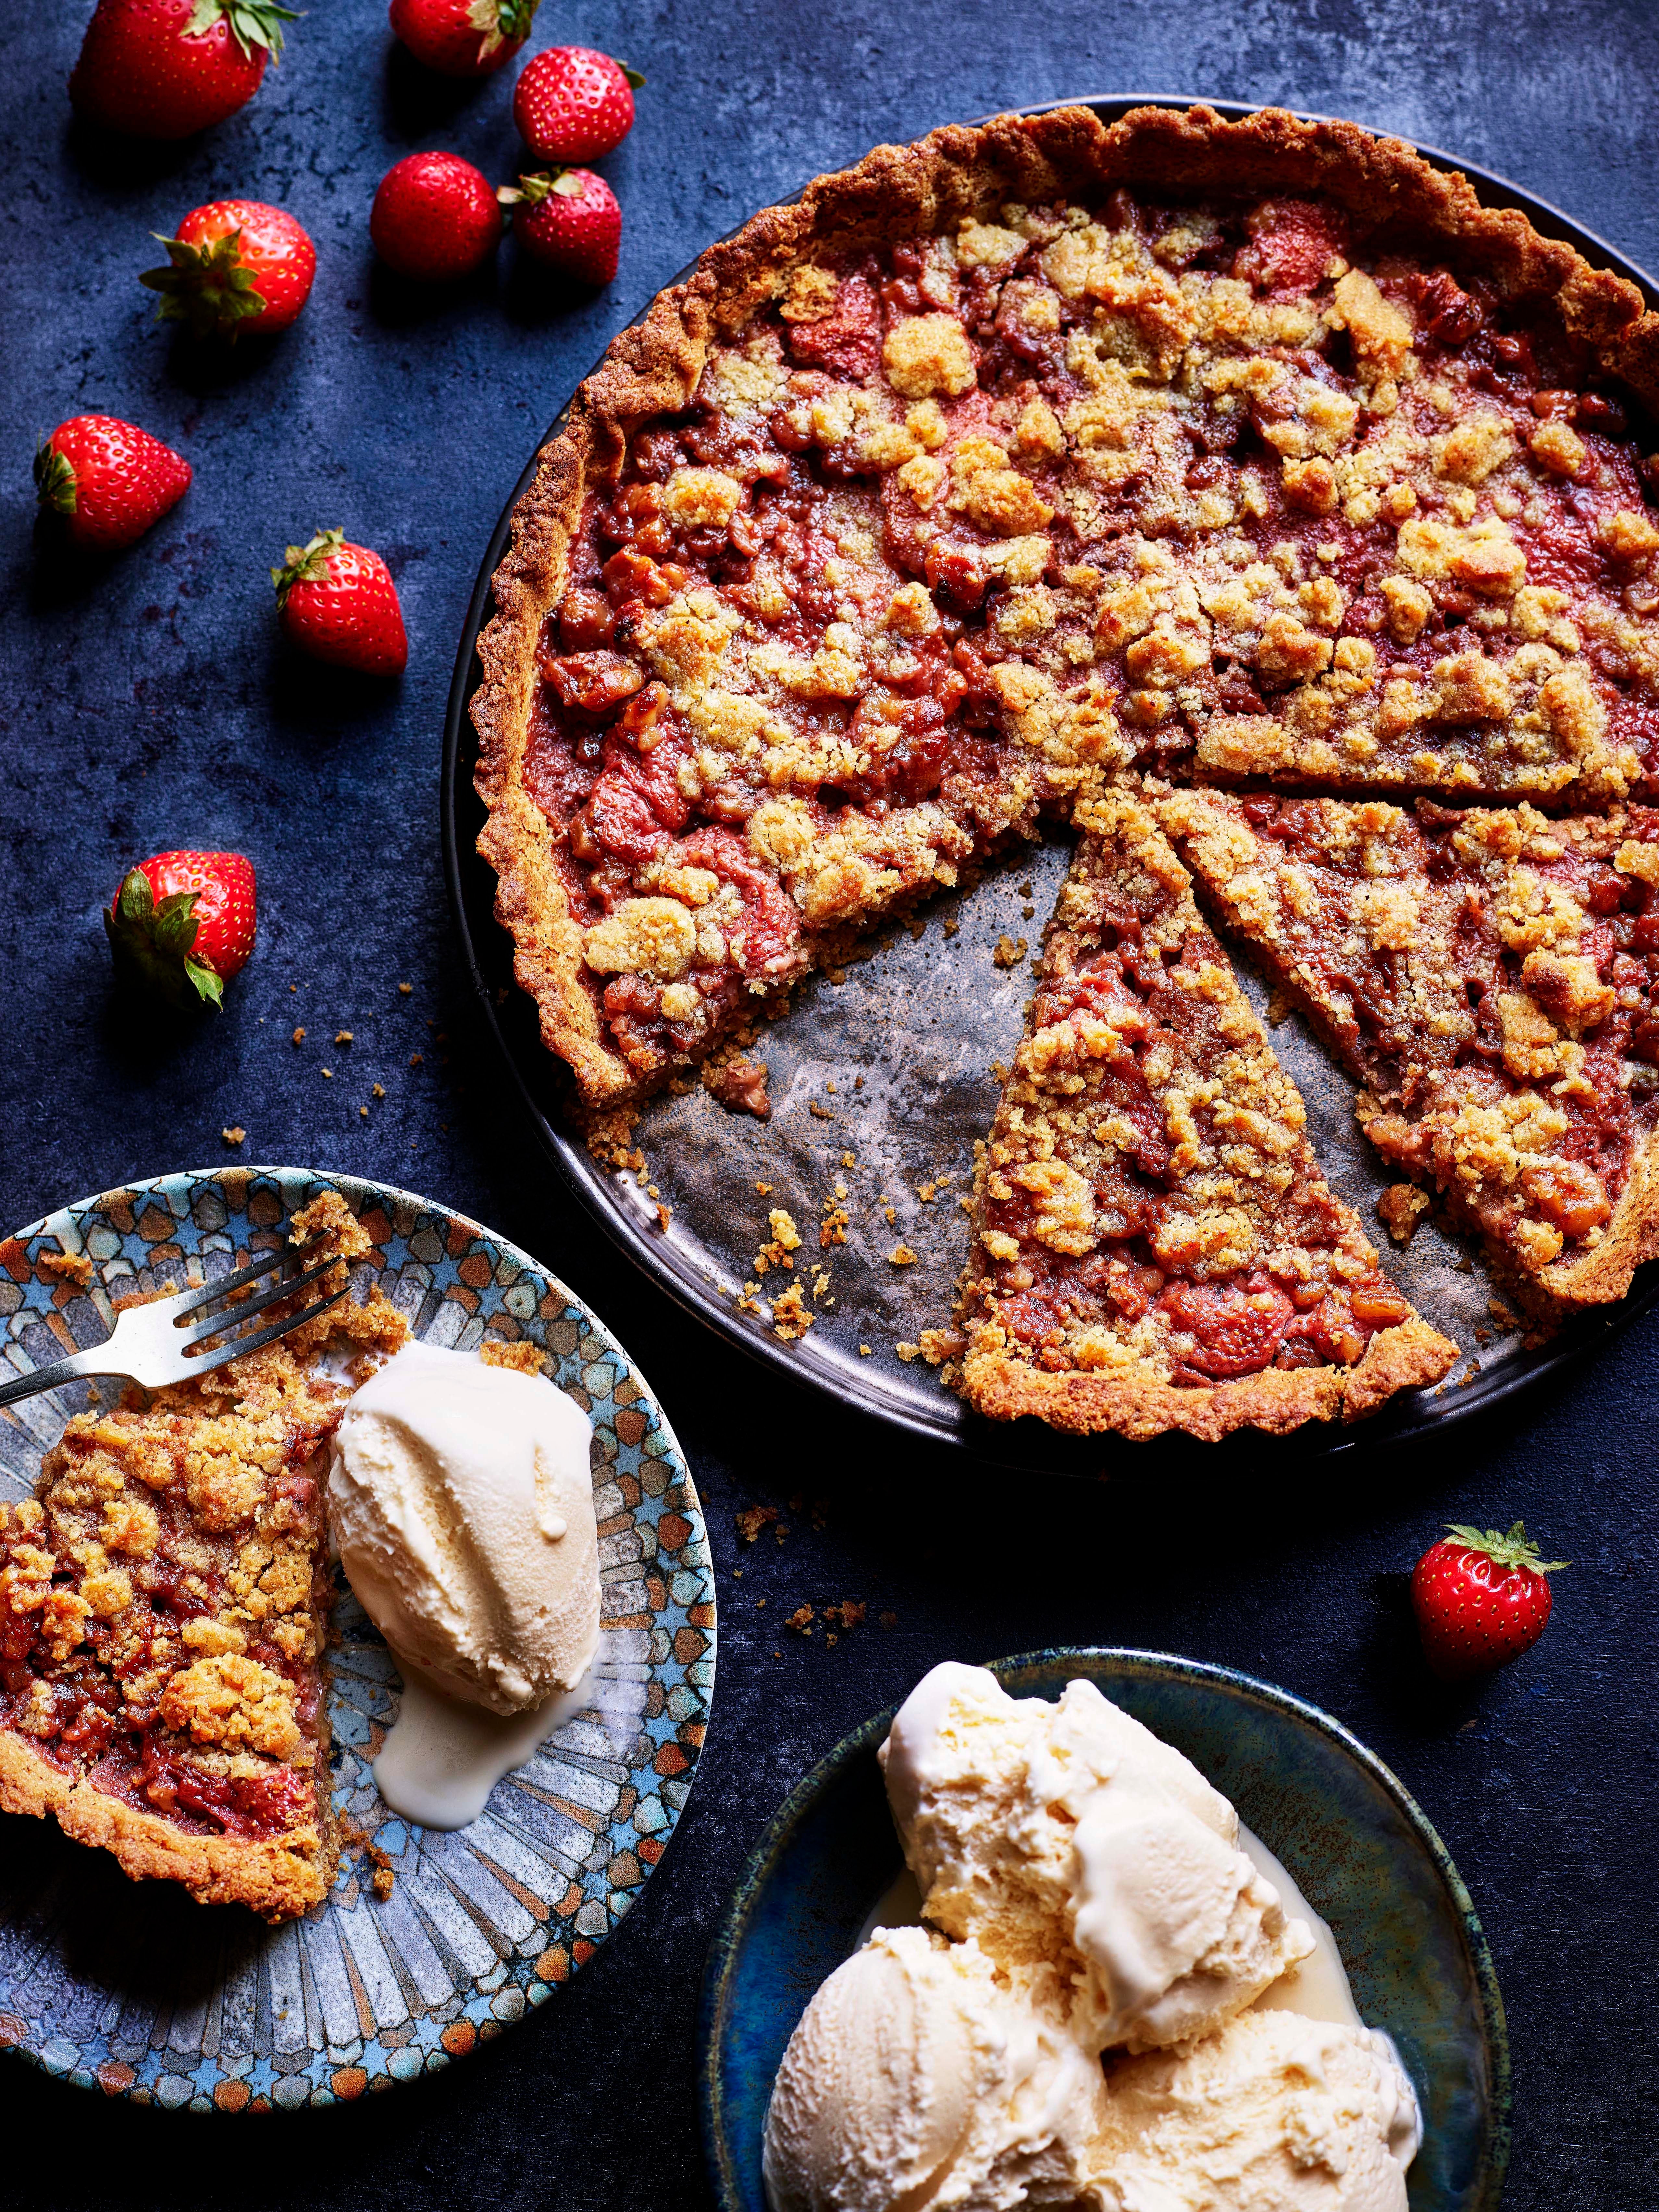 This warm wild strawberry crostata is inspired by an Italian bakery treat